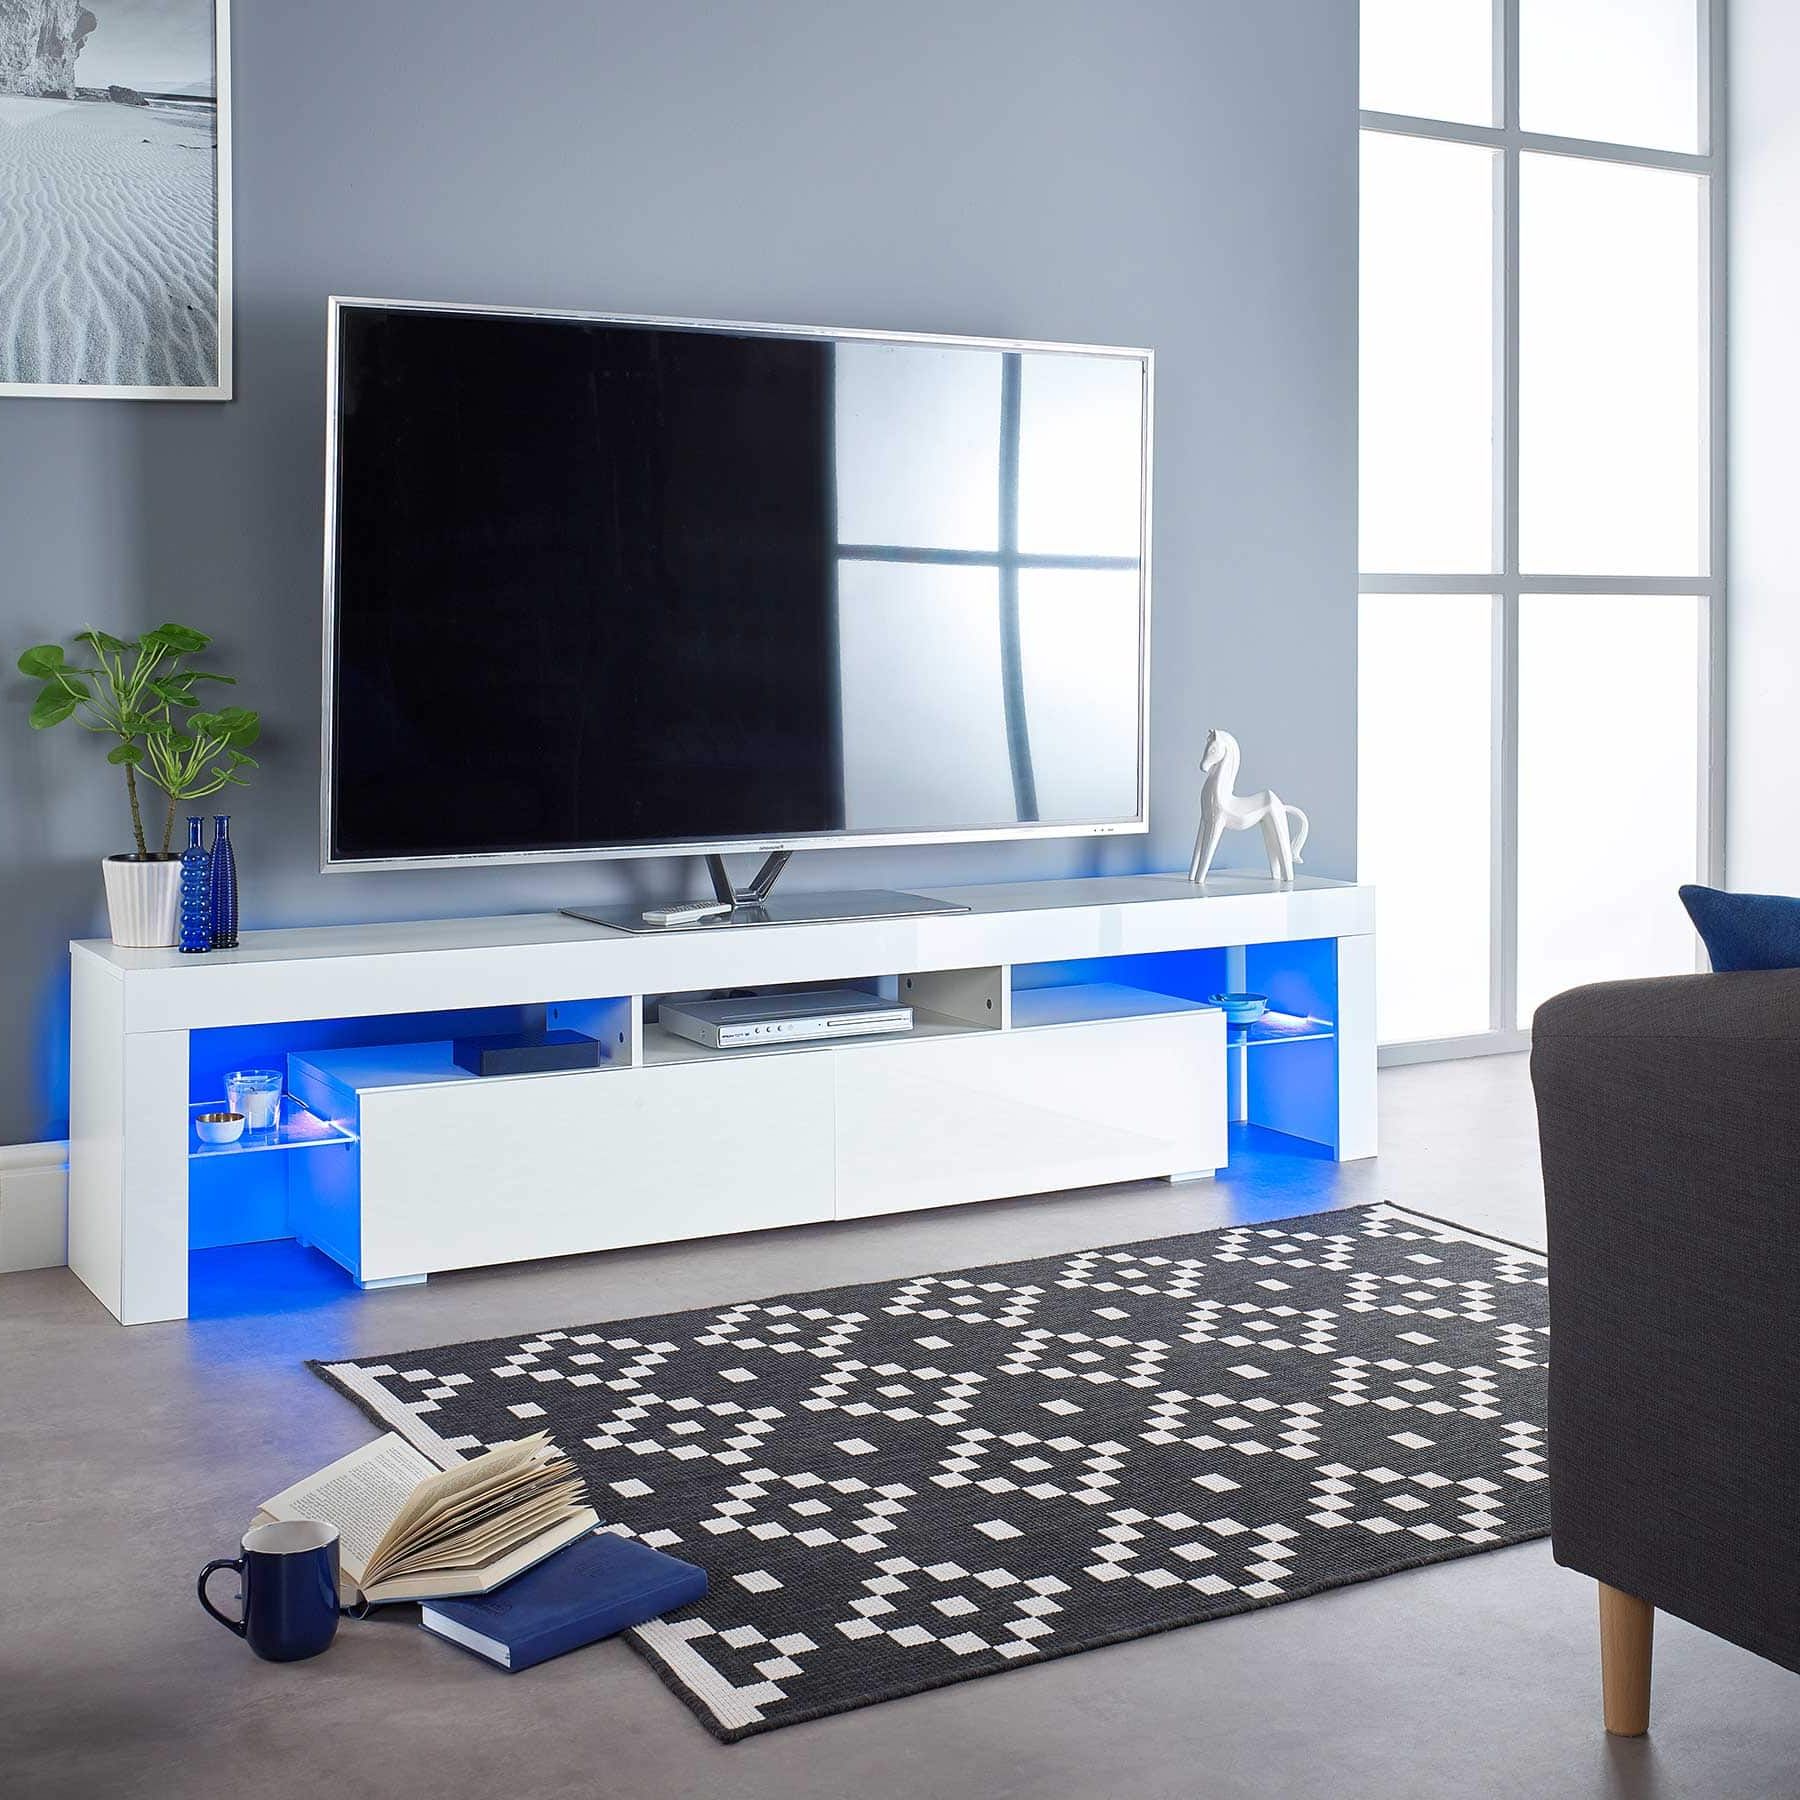 Ts1704 Wide 200cm White Tv Cabinet For Up To 80″ Screens | Mmt Inside Bromley Blue Wide Tv Stands (View 9 of 20)